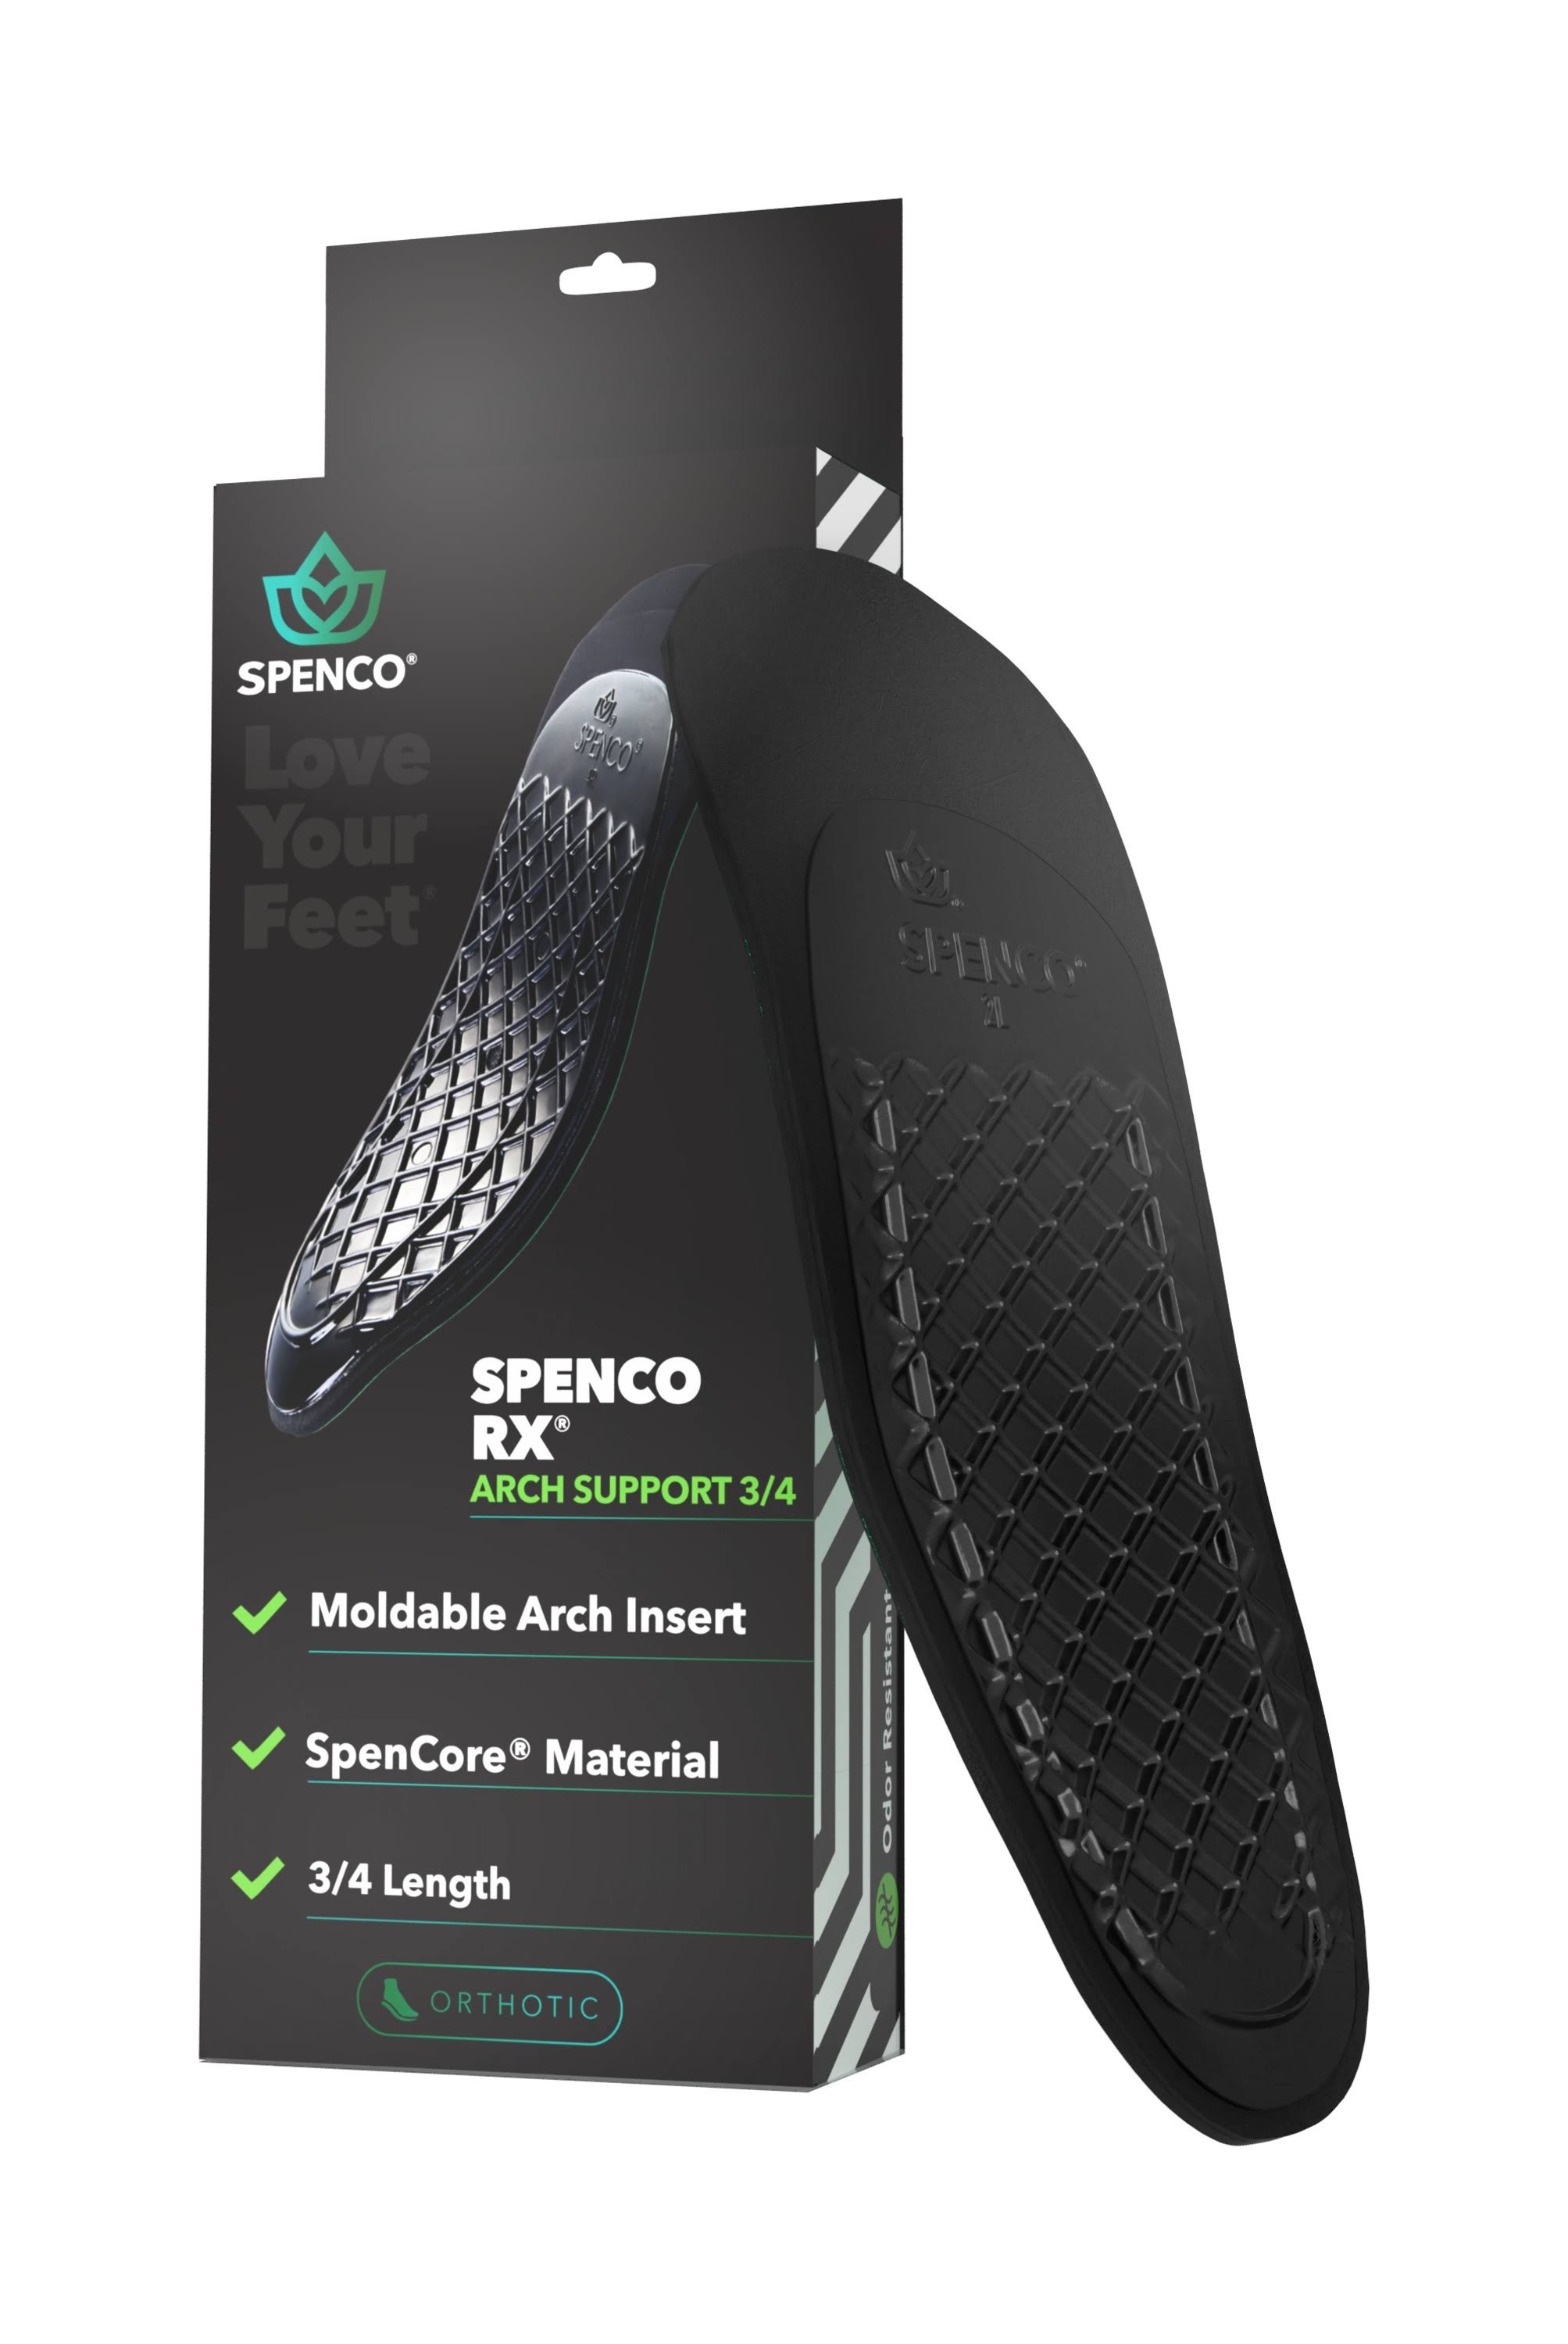 Spenco 3/4 Length Orthotic Arch Support - Women's 5-6 US